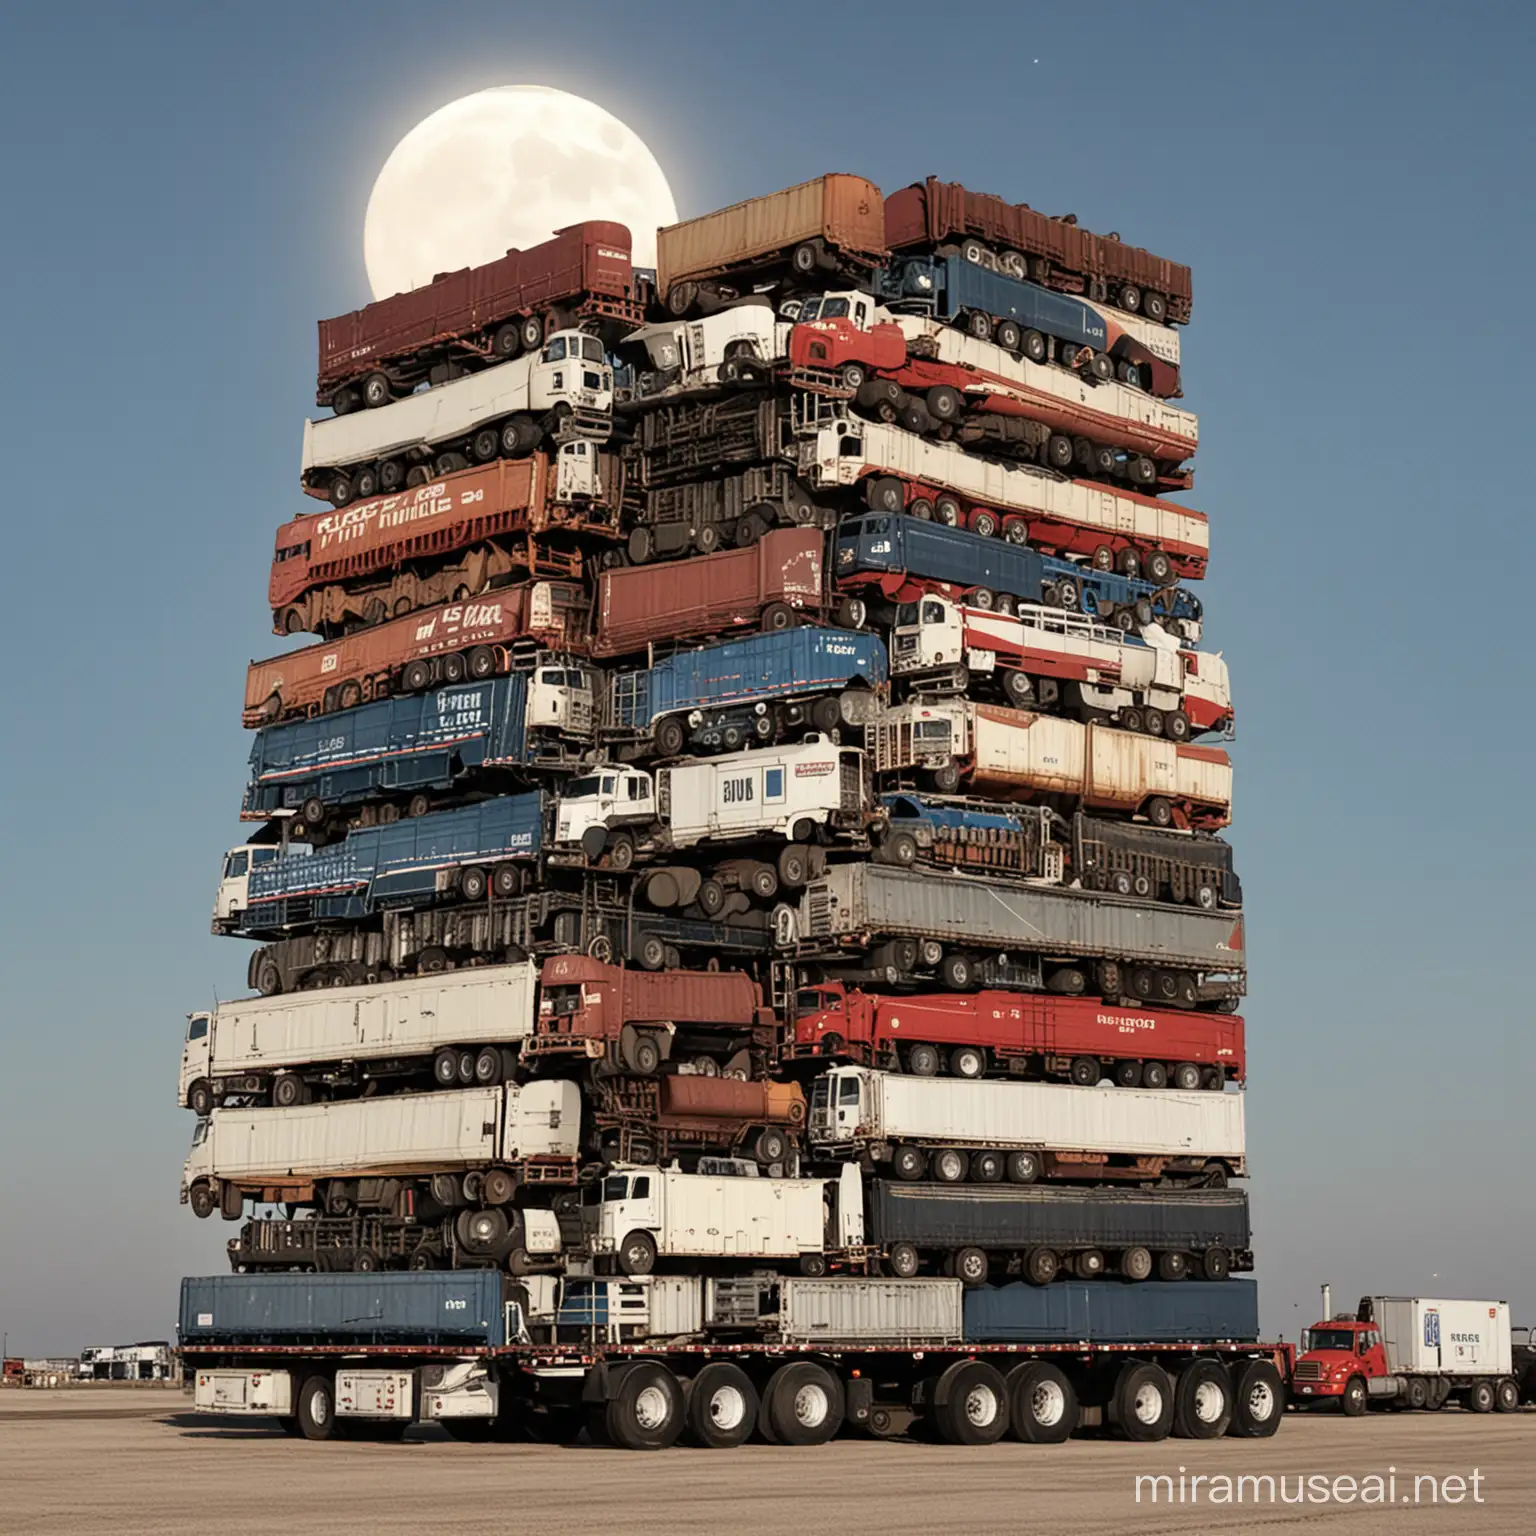 piled all the semi trucks in the US on top of each other, they would reach all the way to the moon! 